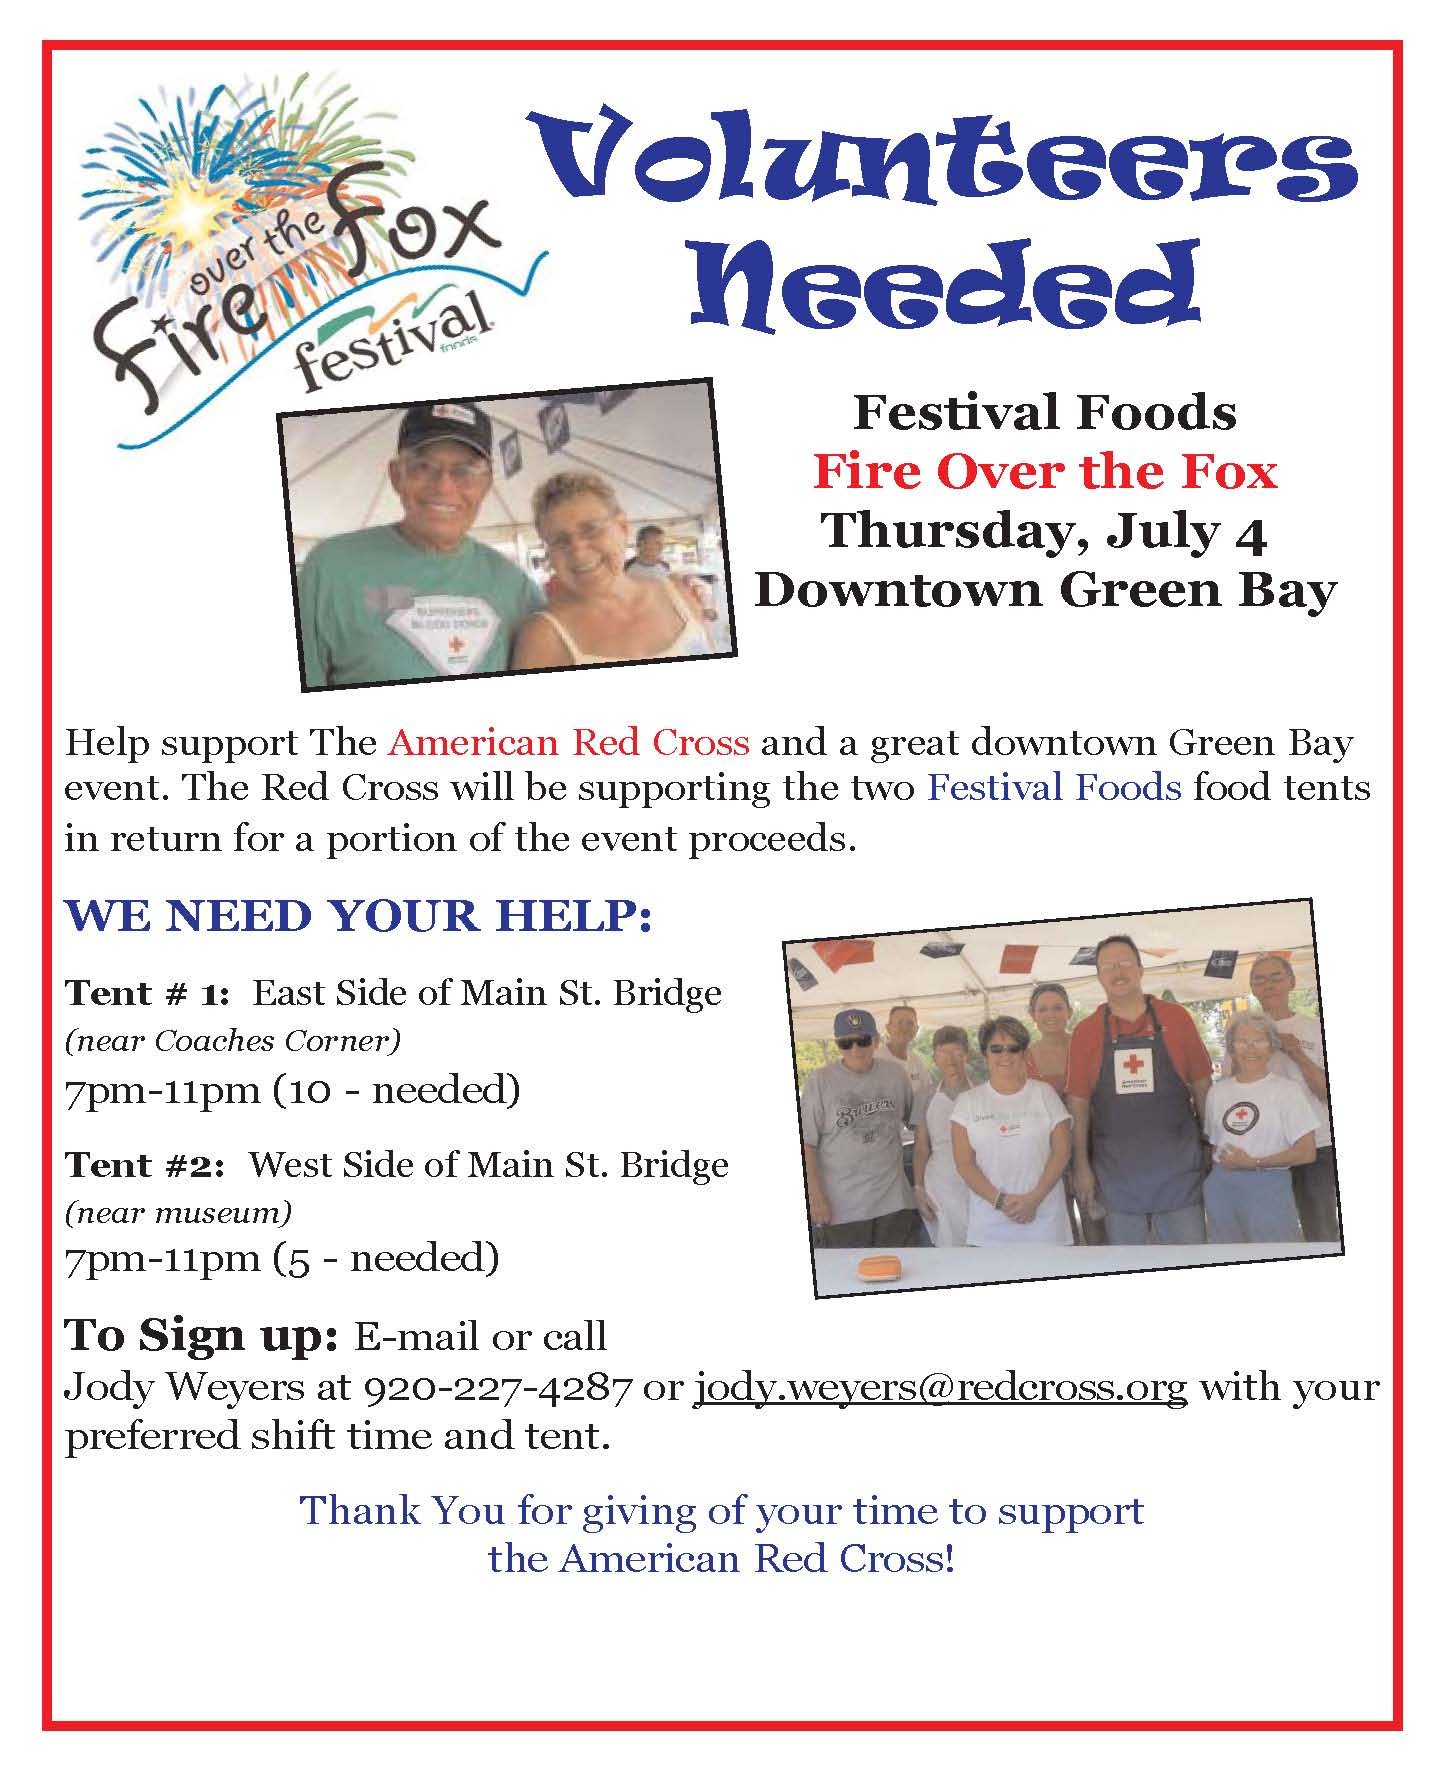 Volunteers Needed July 4th Festival Foods Fire Over the